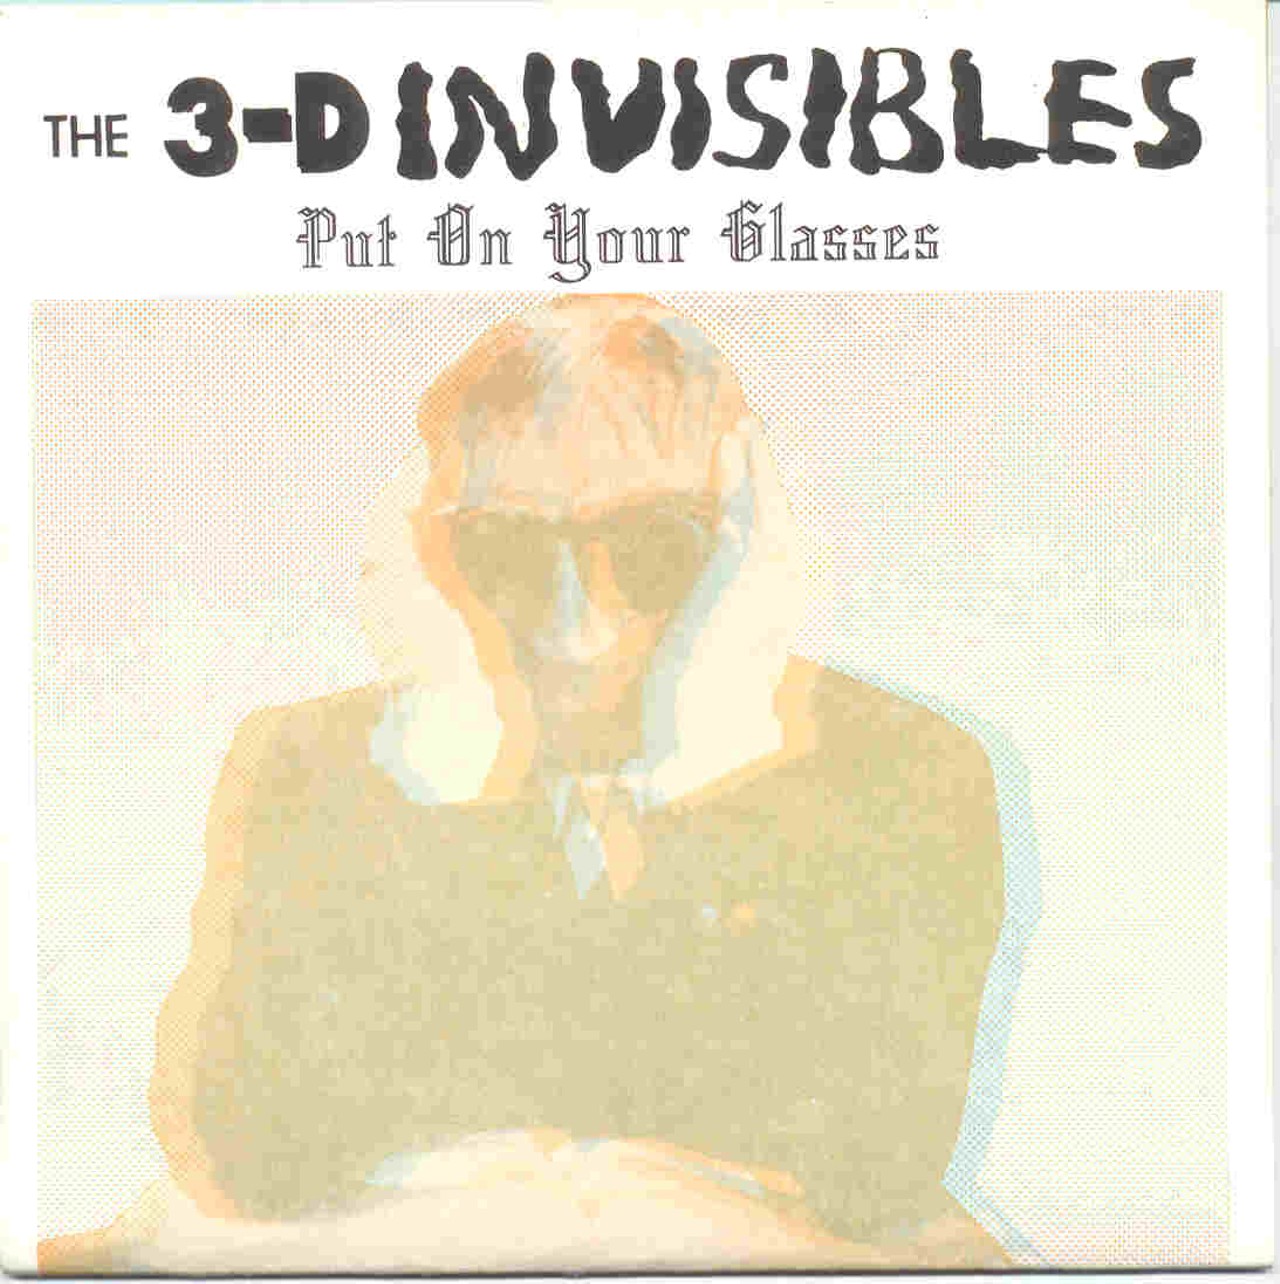 The 3D Invisibles
“Walking Through the Graveyard”
Since ’81, Rick Mills has been leading this monster-crazy surf-rock band through more than three decades of creature feature-influenced, fun and whacky guitar jams. They actually filmed a video for this ’84 tune from the Put on Your Glasses album, which can be seen here. The band sing of getting lost in a mossy graveyard surrounded by graves, and the video tells the same story. Silly, awesome fun.